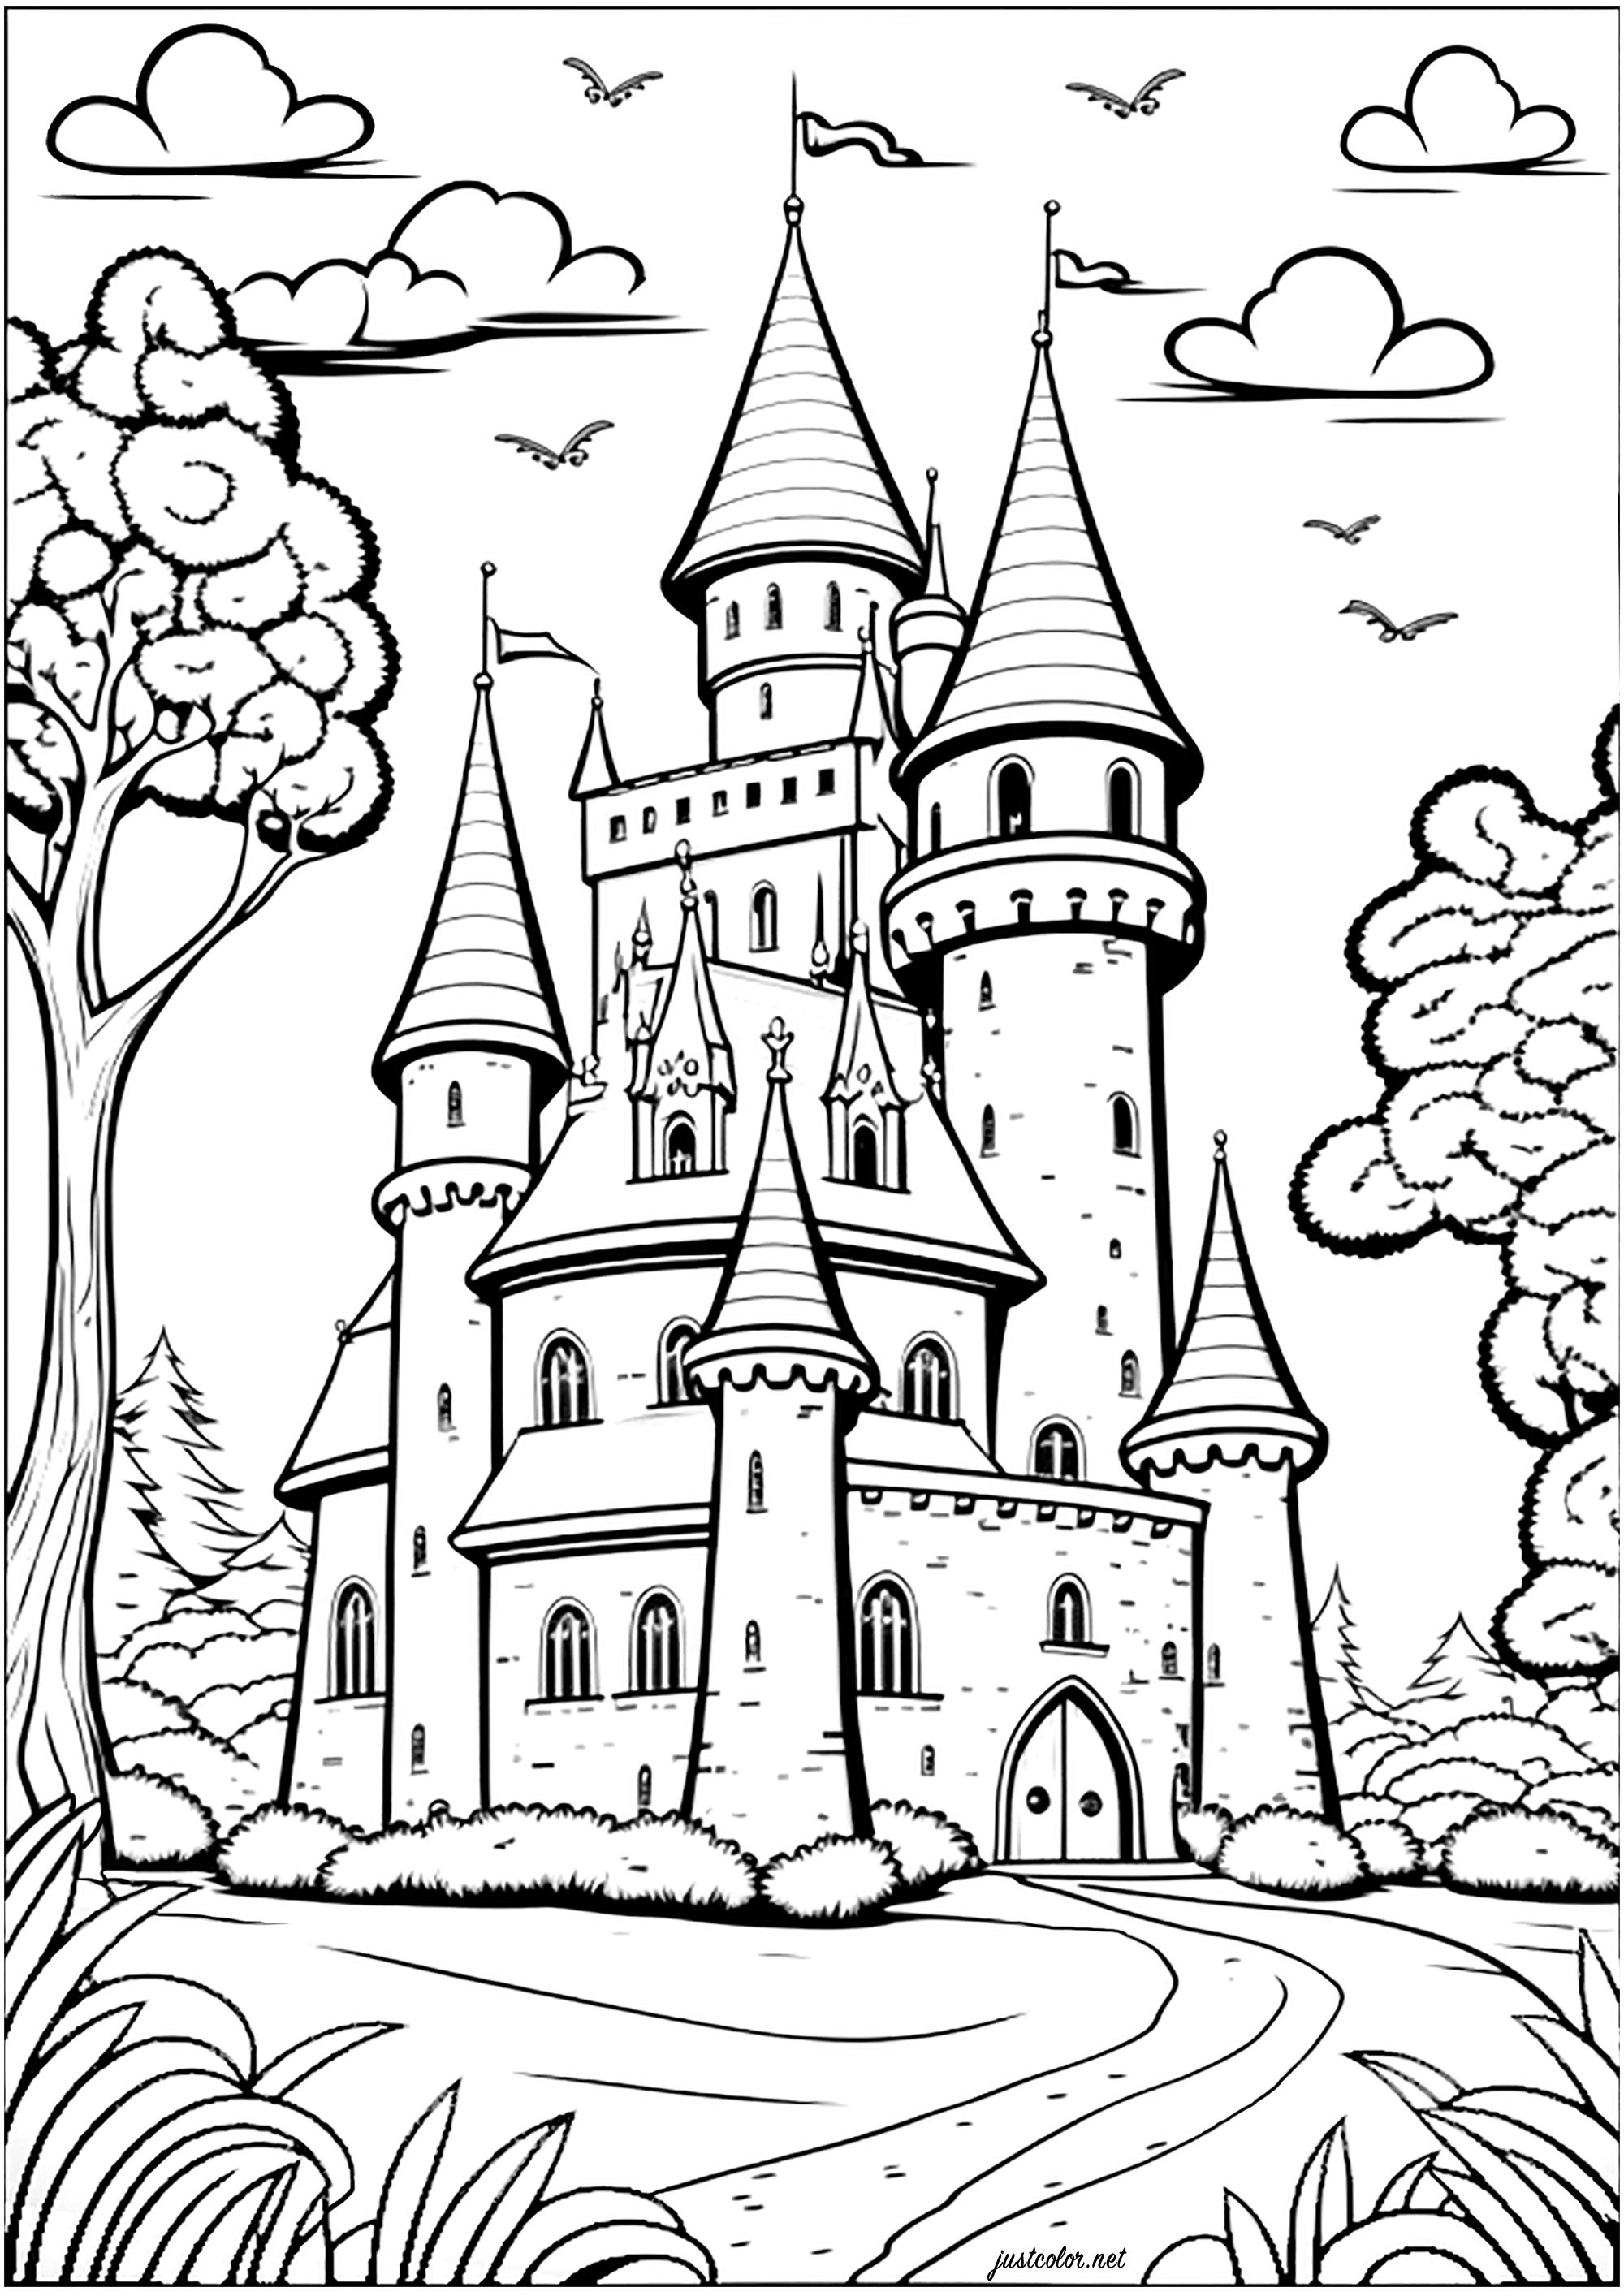 Coloring of a castle in an imaginary kingdom. Color all its turrets, windows, doors and walls for an enchanted moment!